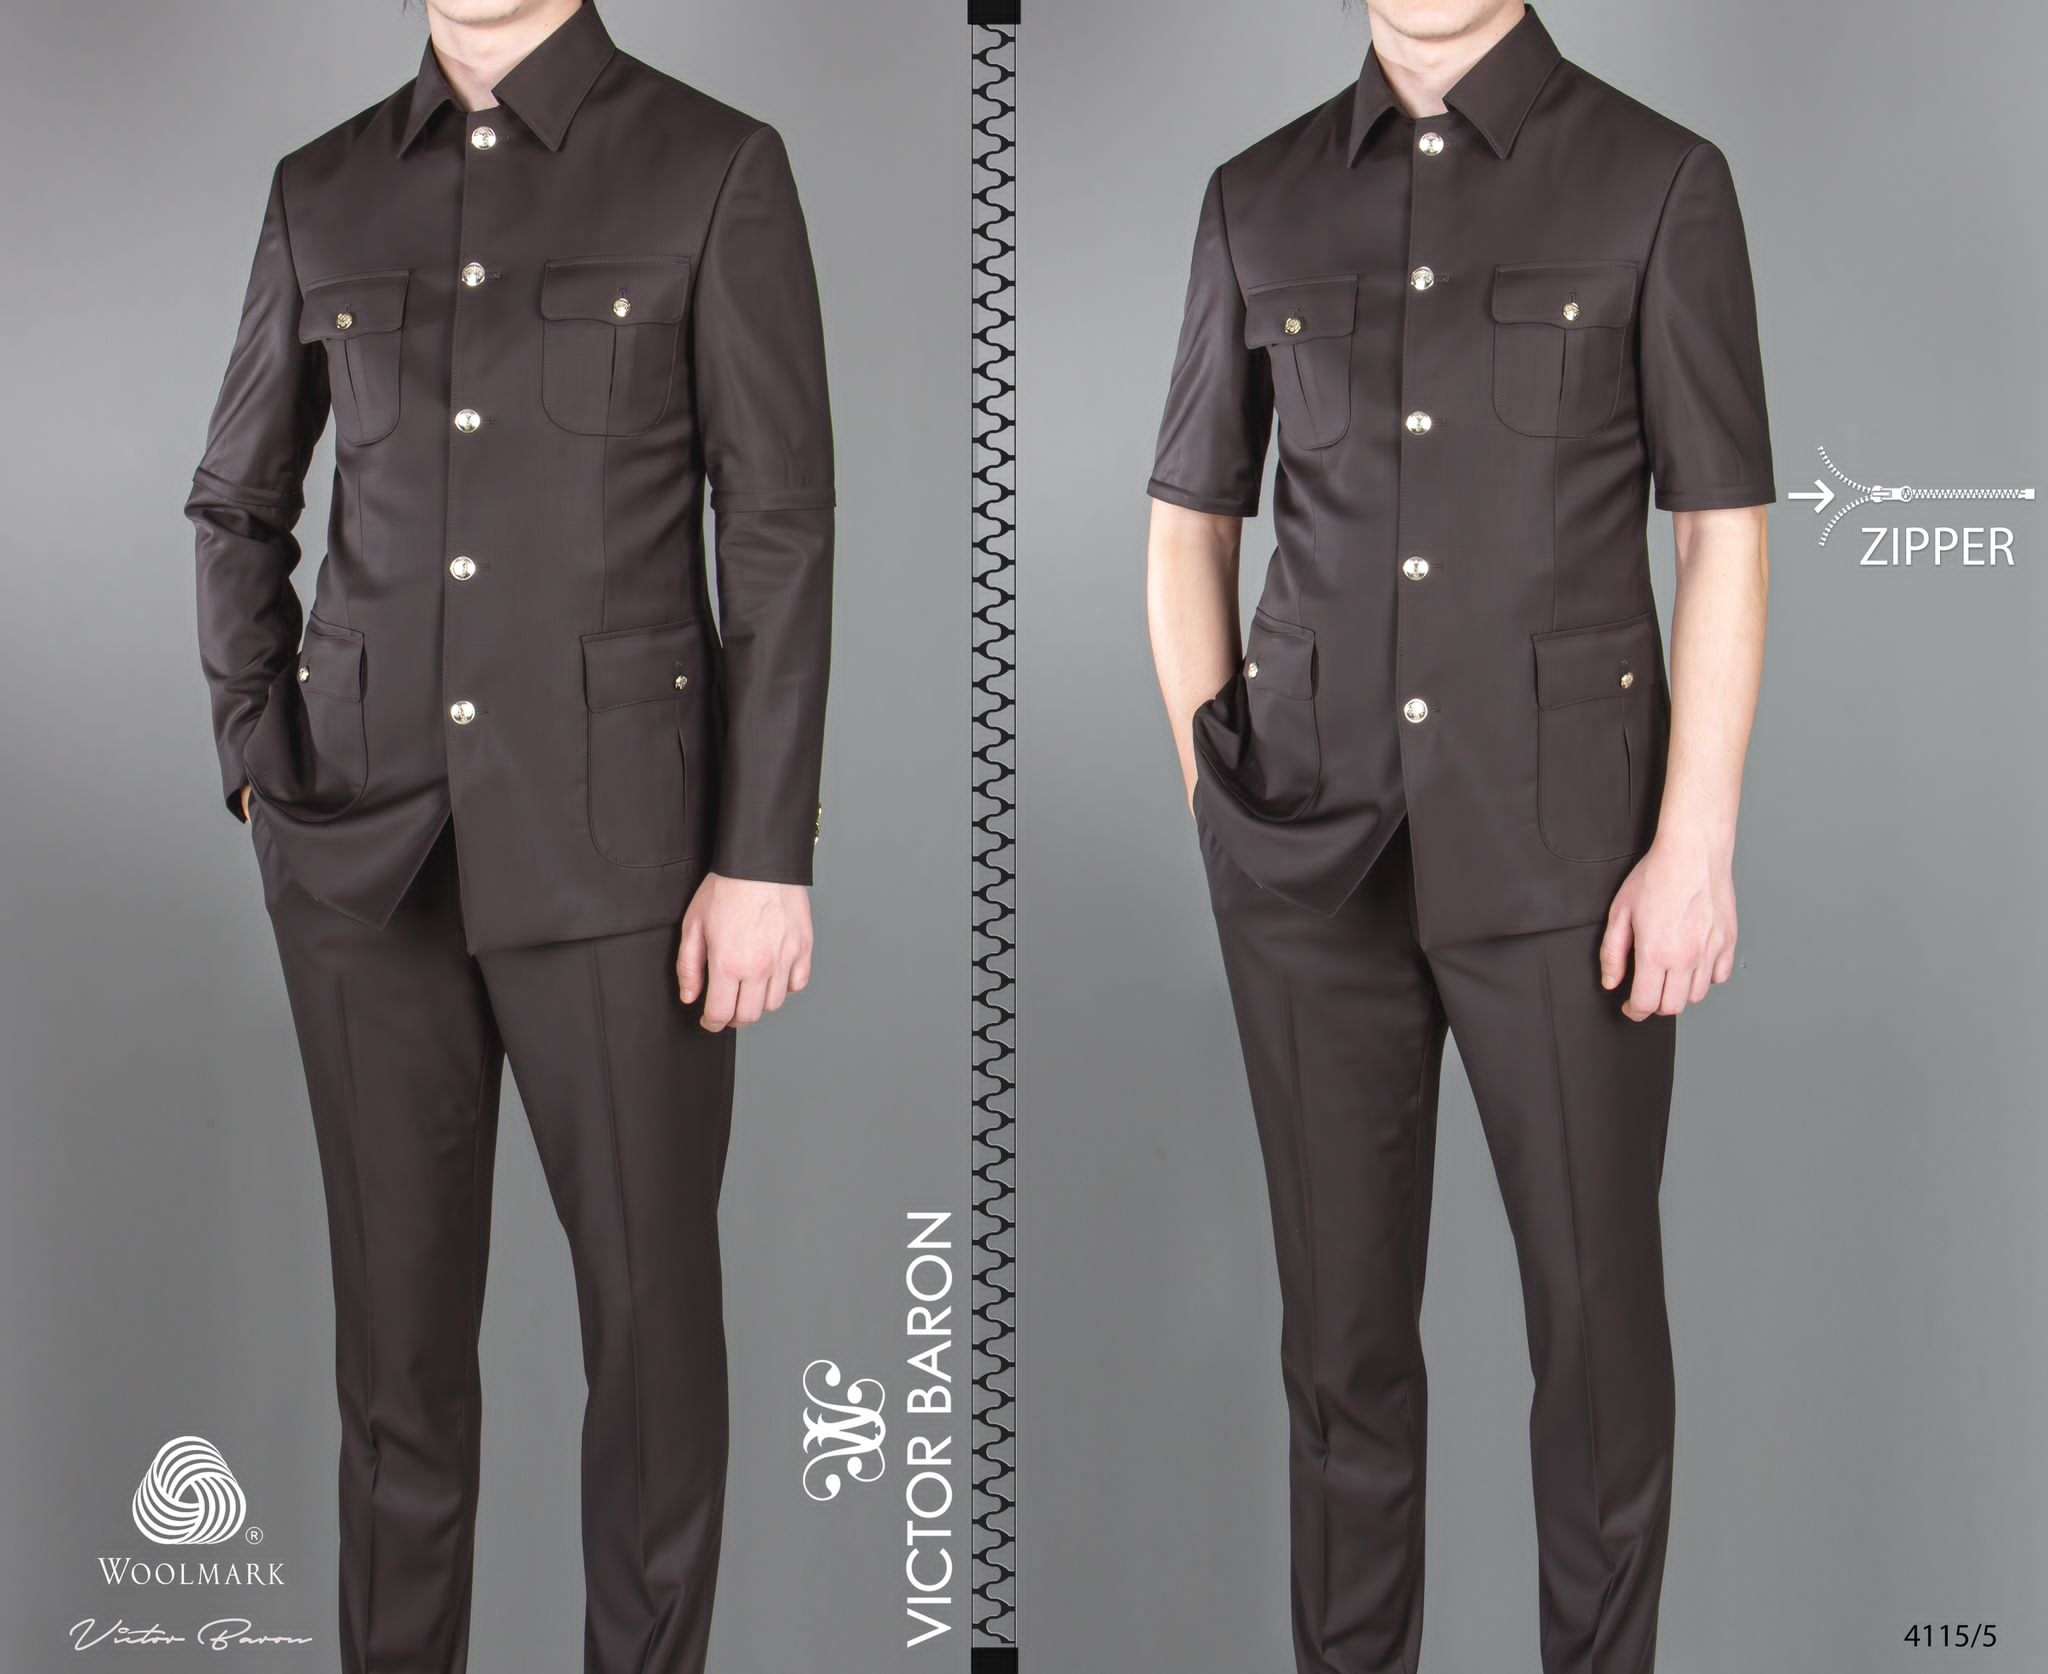 EXECUTIVE BROWN LONGSLEEVE AND SHORTSLEEVE SUIT WITH COLLAR AND GOLDEN BUTTON-deluxe.com.ng